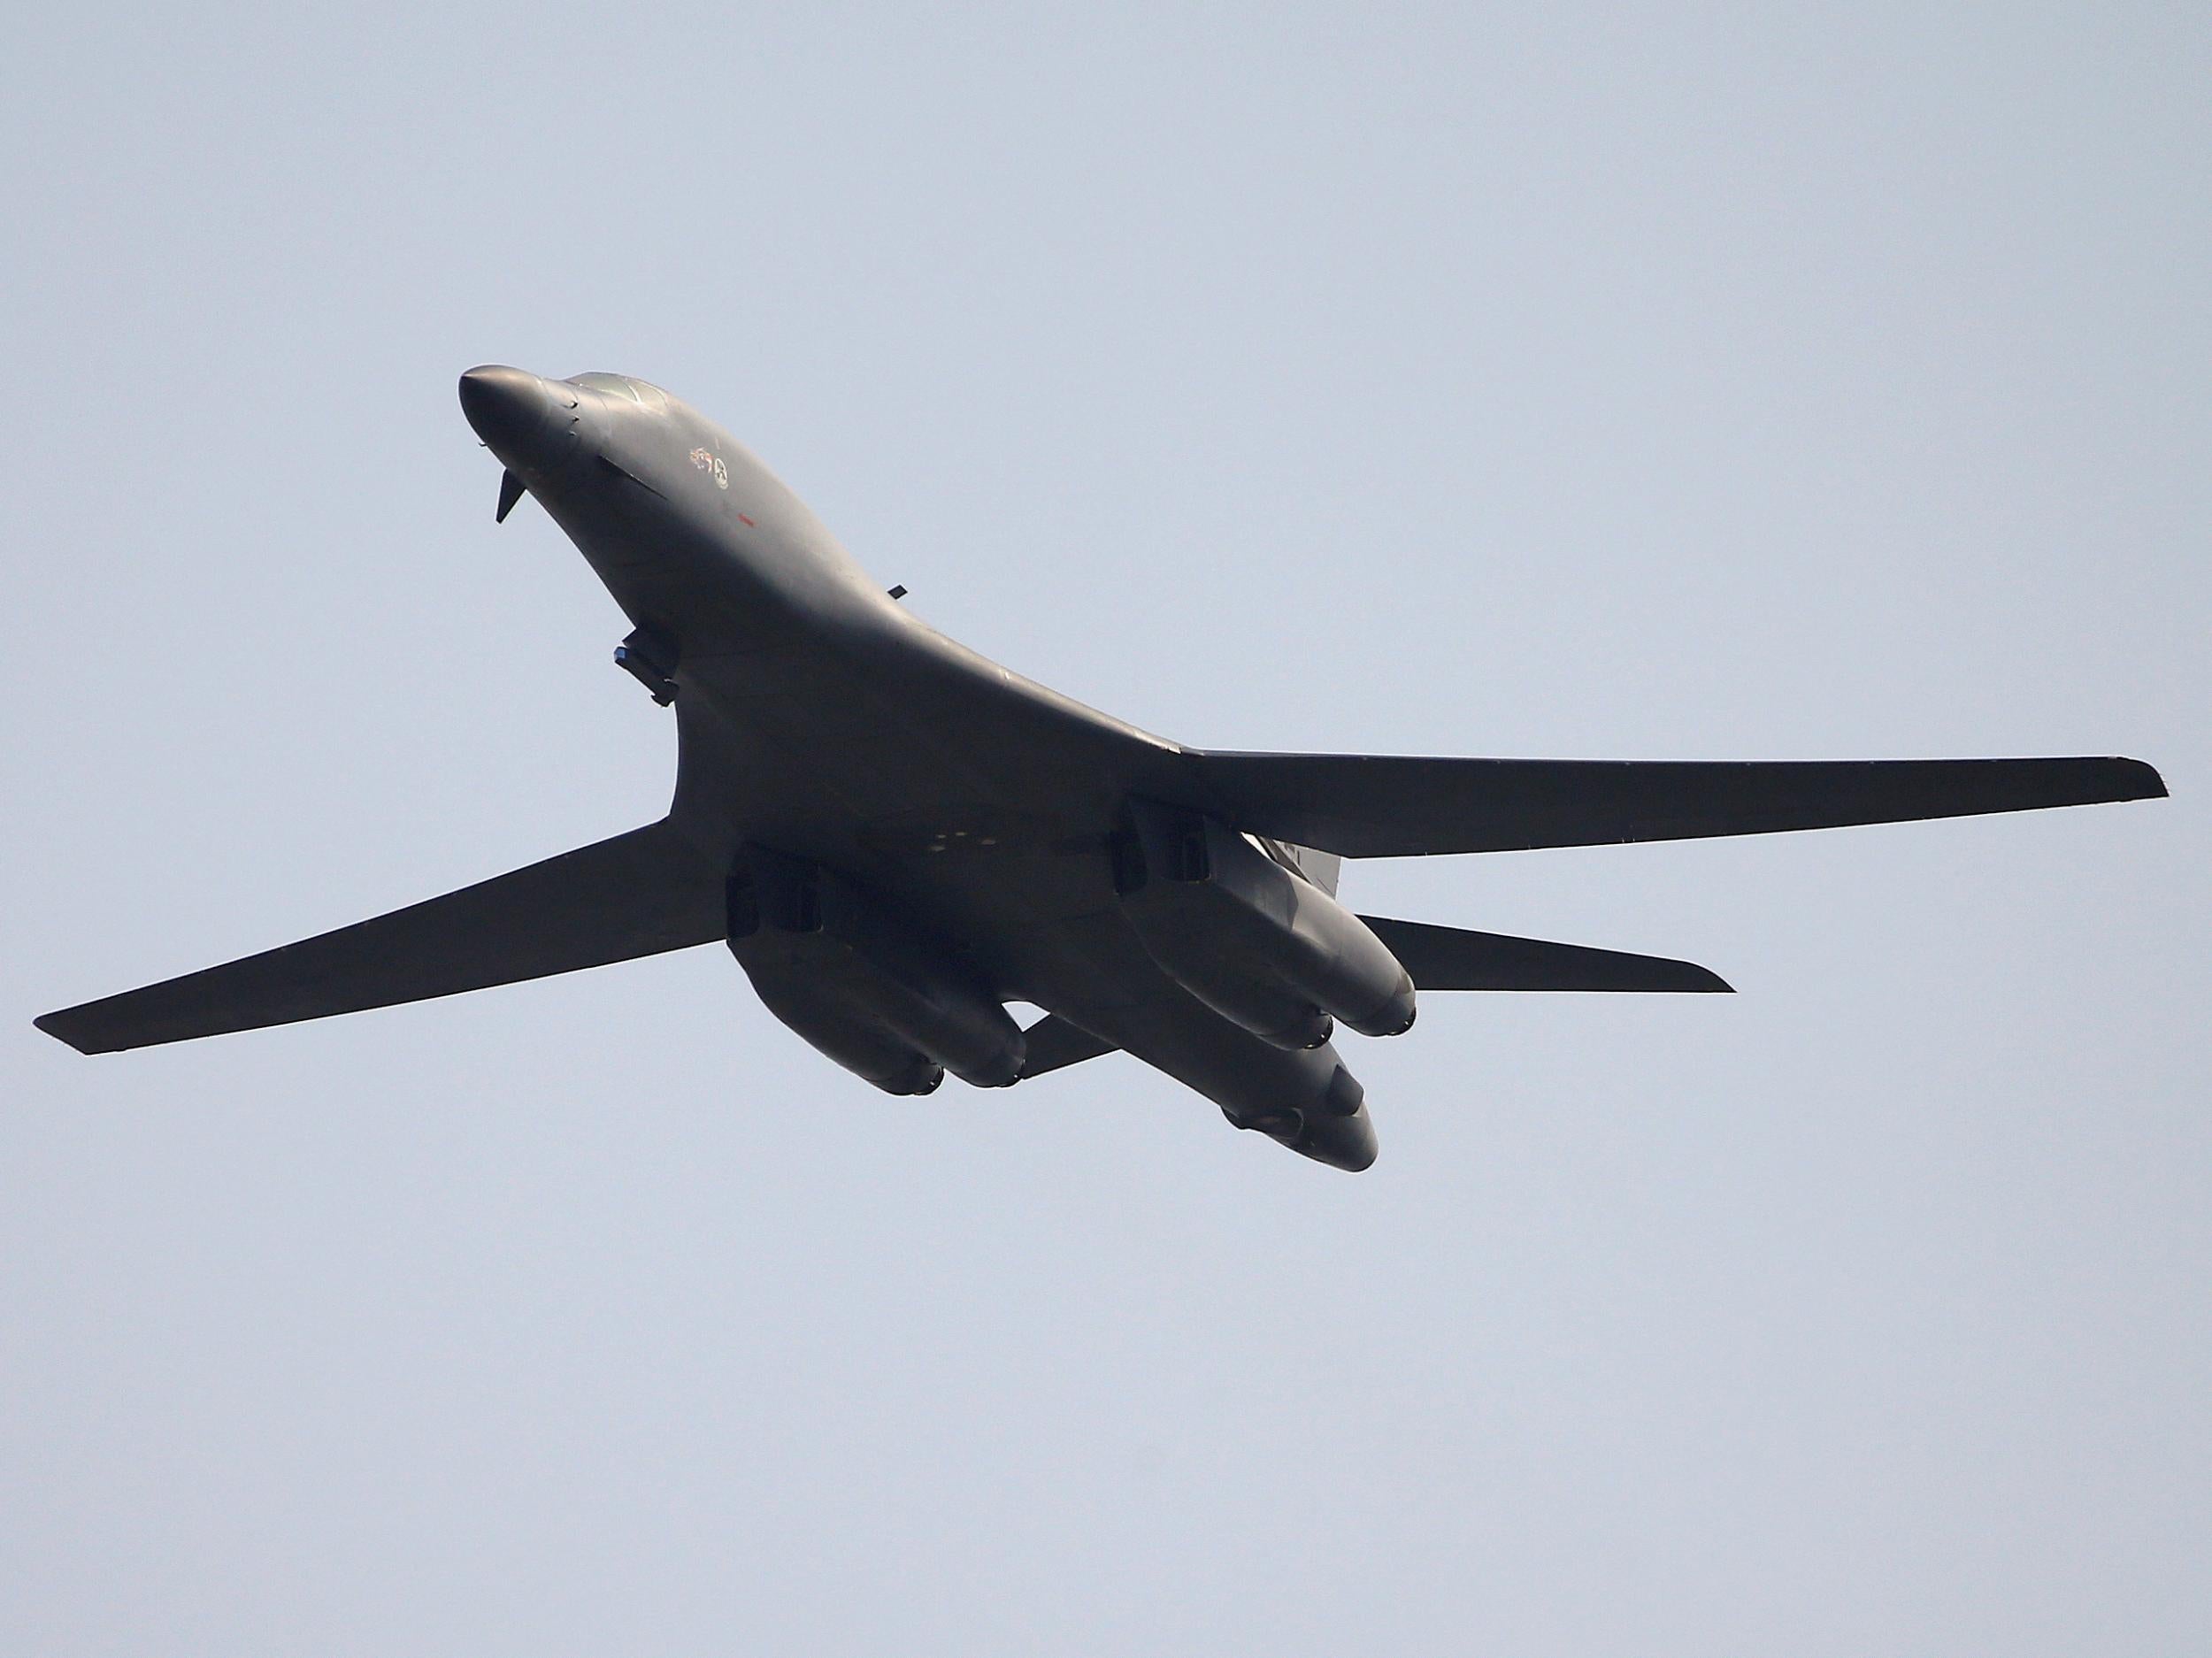 The US could use B-1B bombers against North Korea